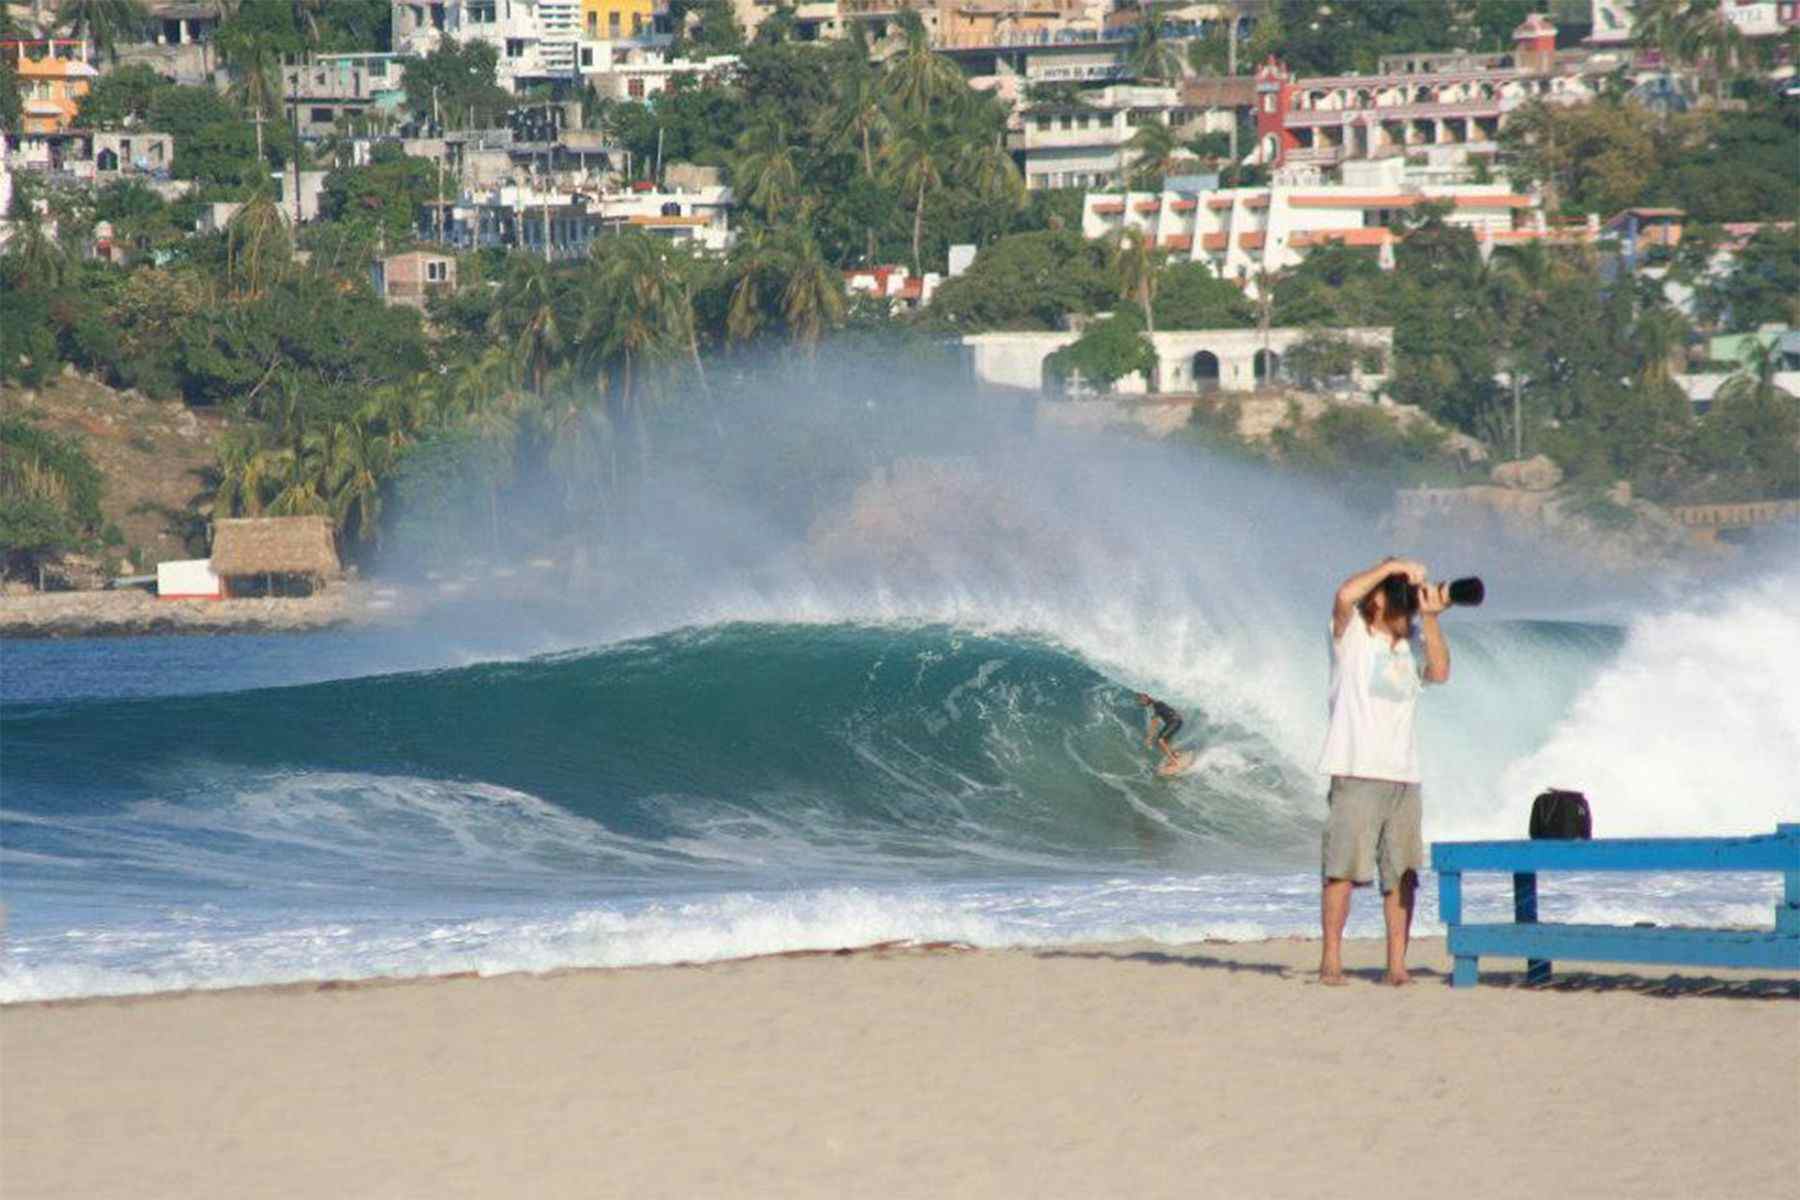 surfer in the barrel at puerto escondido, mexico, with a photographer on the beach in the foreground